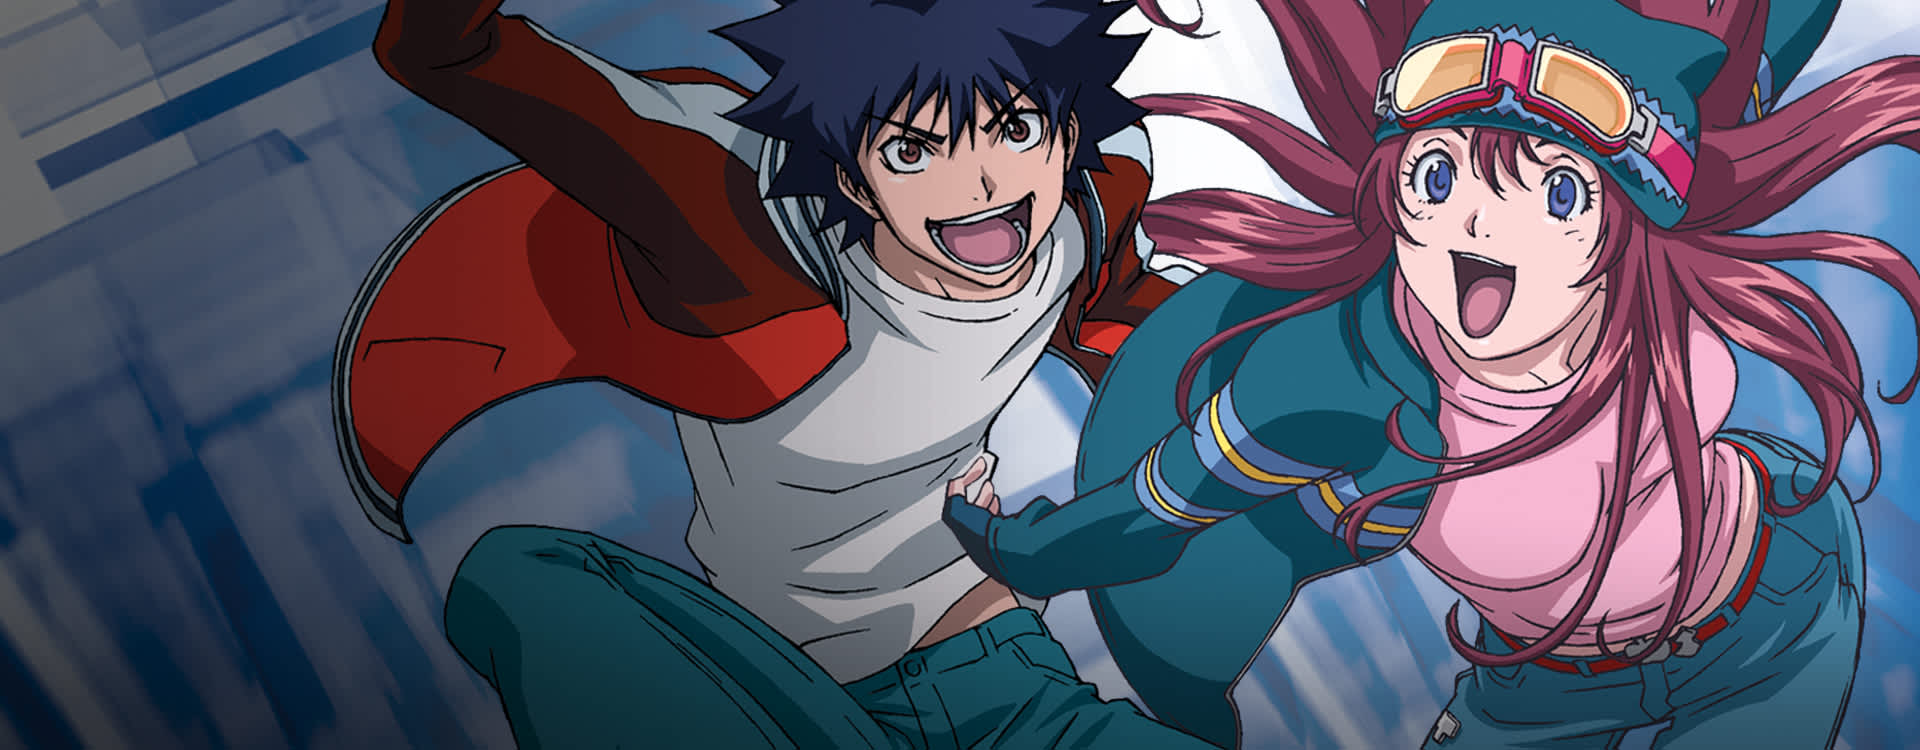 download air gear S2 sub indo